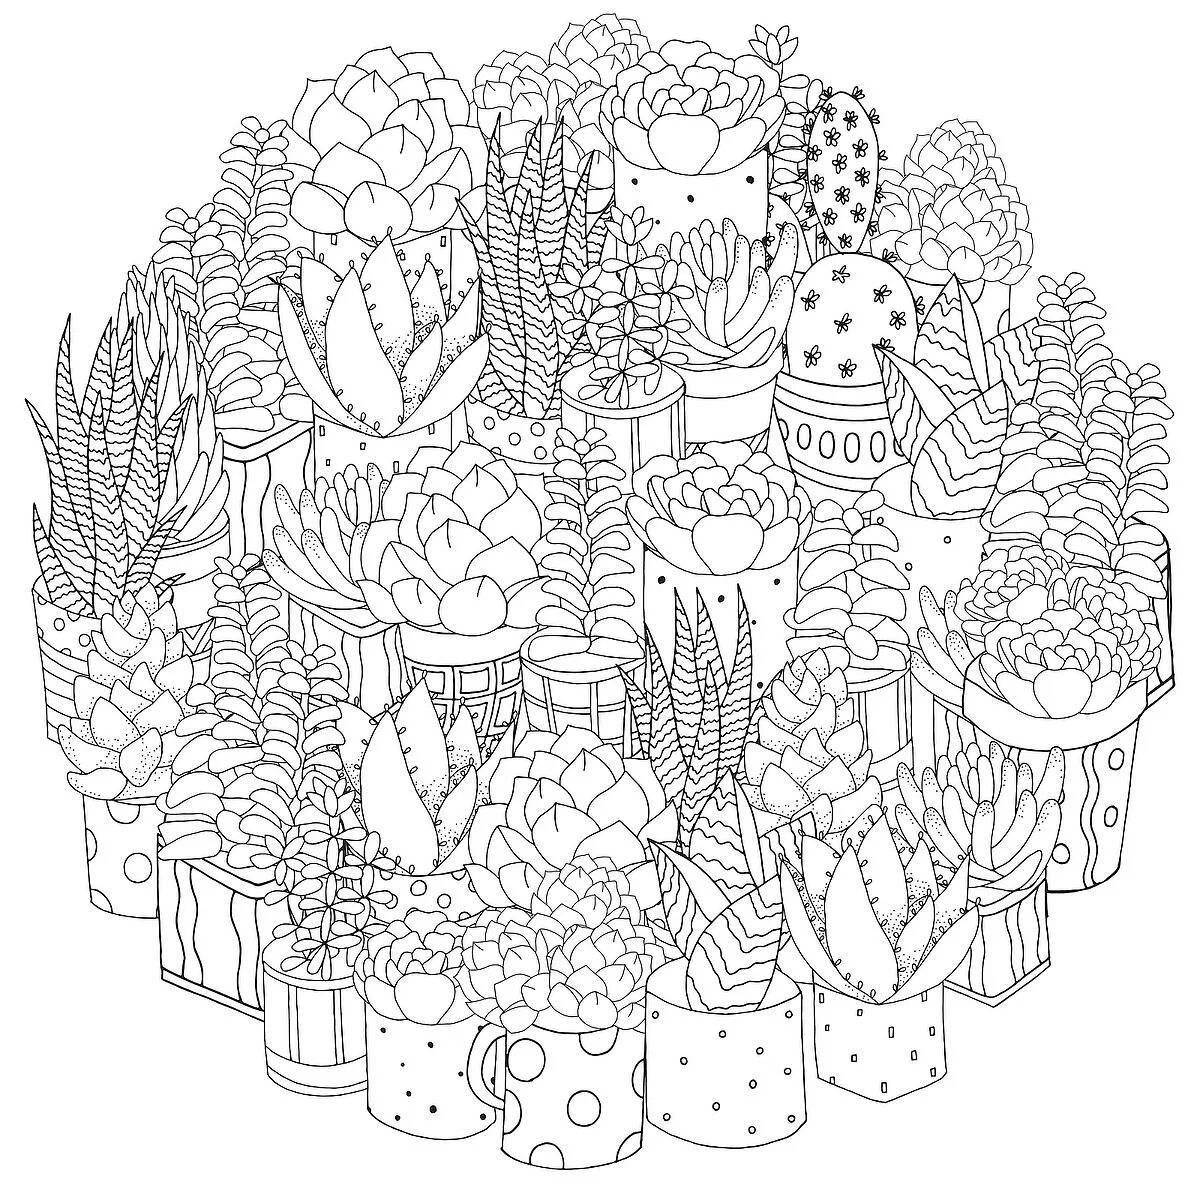 Relaxing cactus coloring page